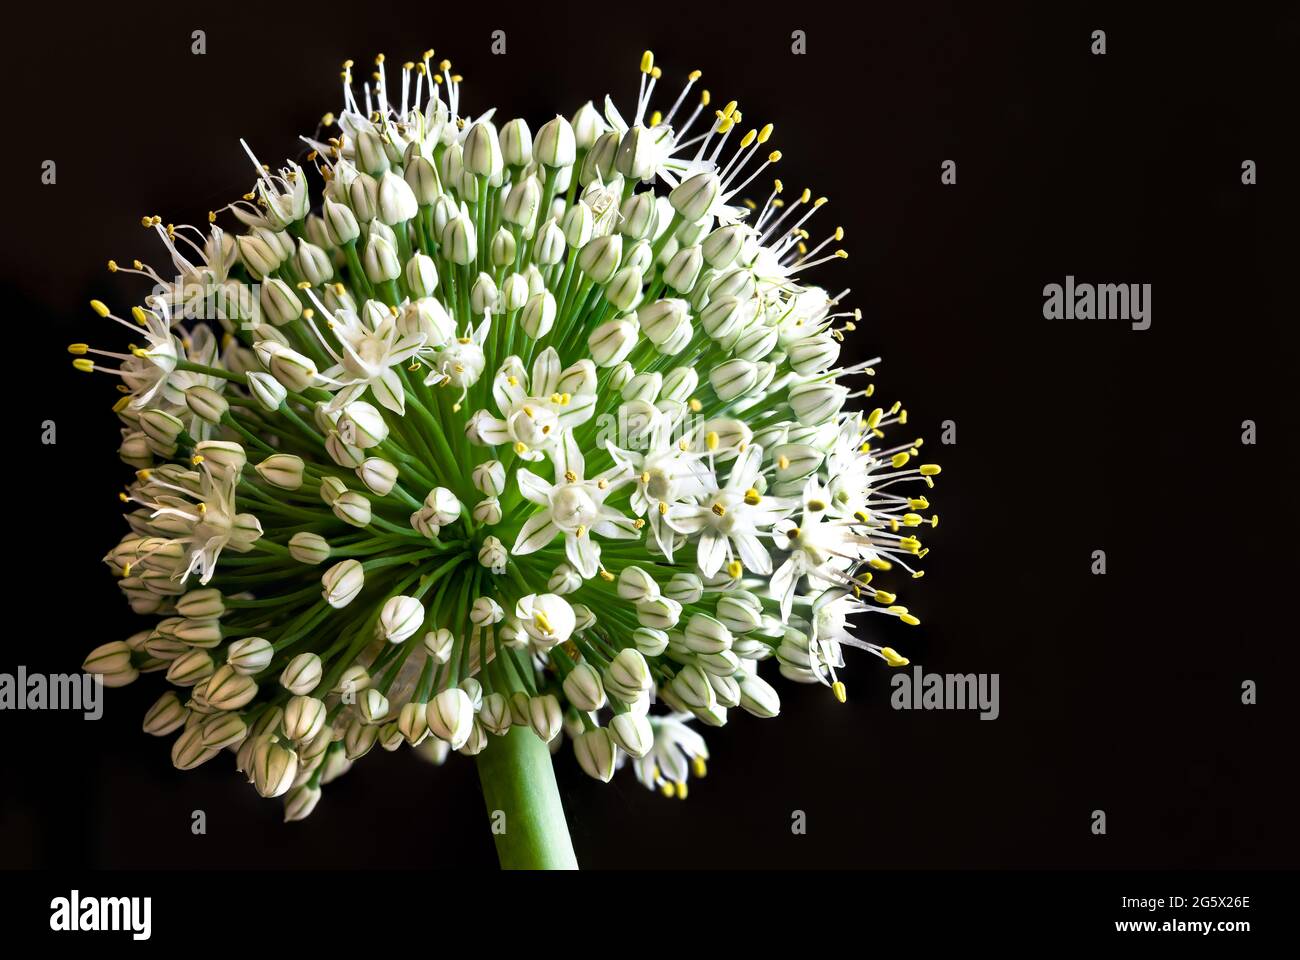 Onion flower on black background, close-up photo of growing onion vegetable Stock Photo